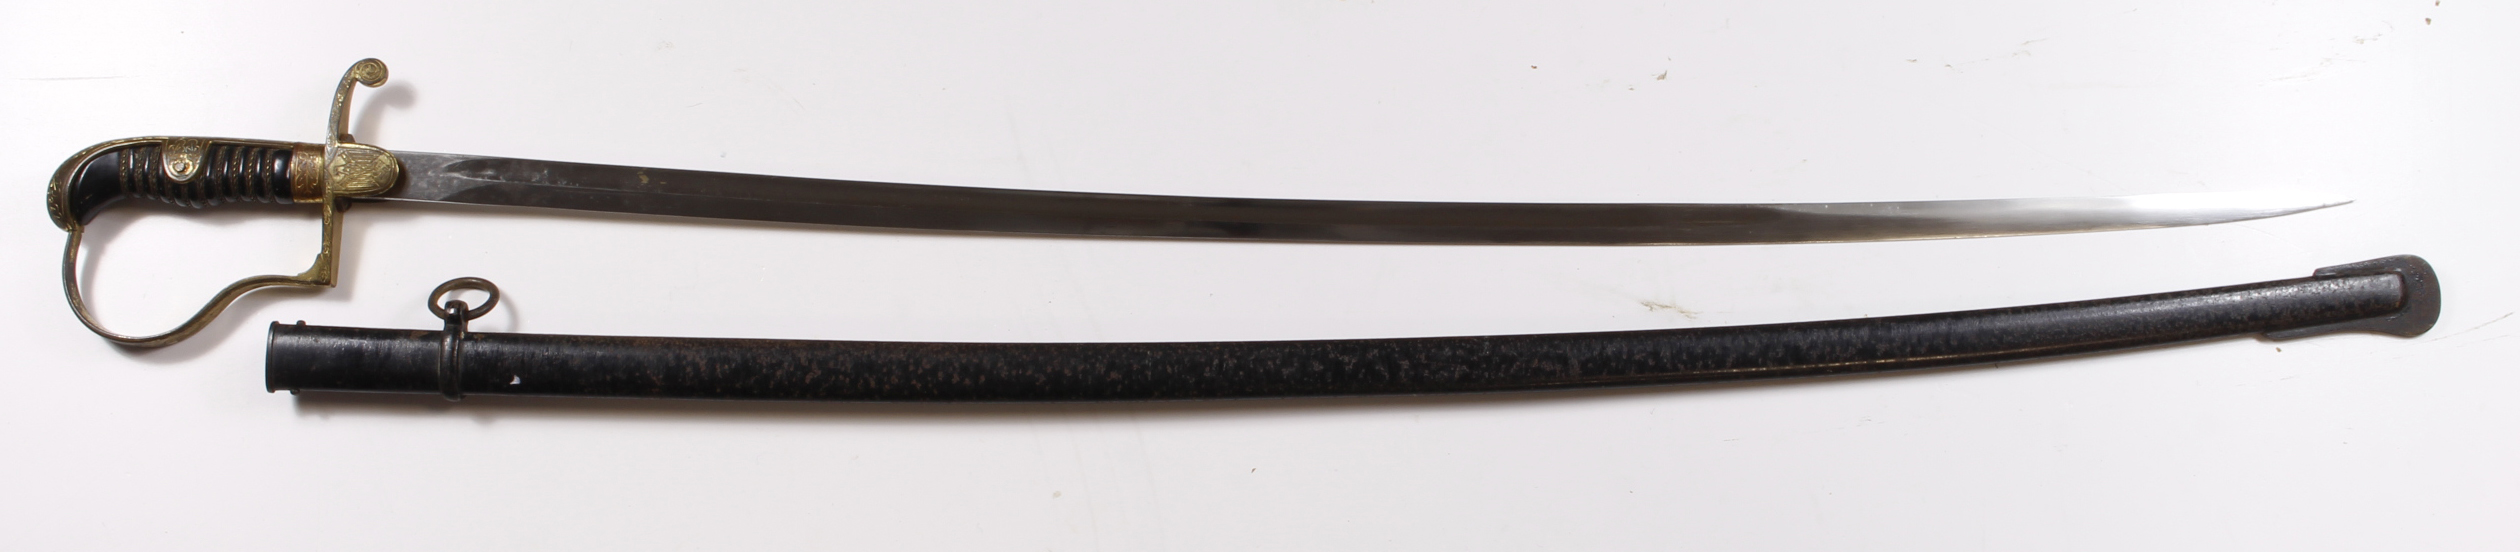 German Nazi Army Officers Sword, slim single edged fullered blade 31.5". Blade maker marked 'A.W.